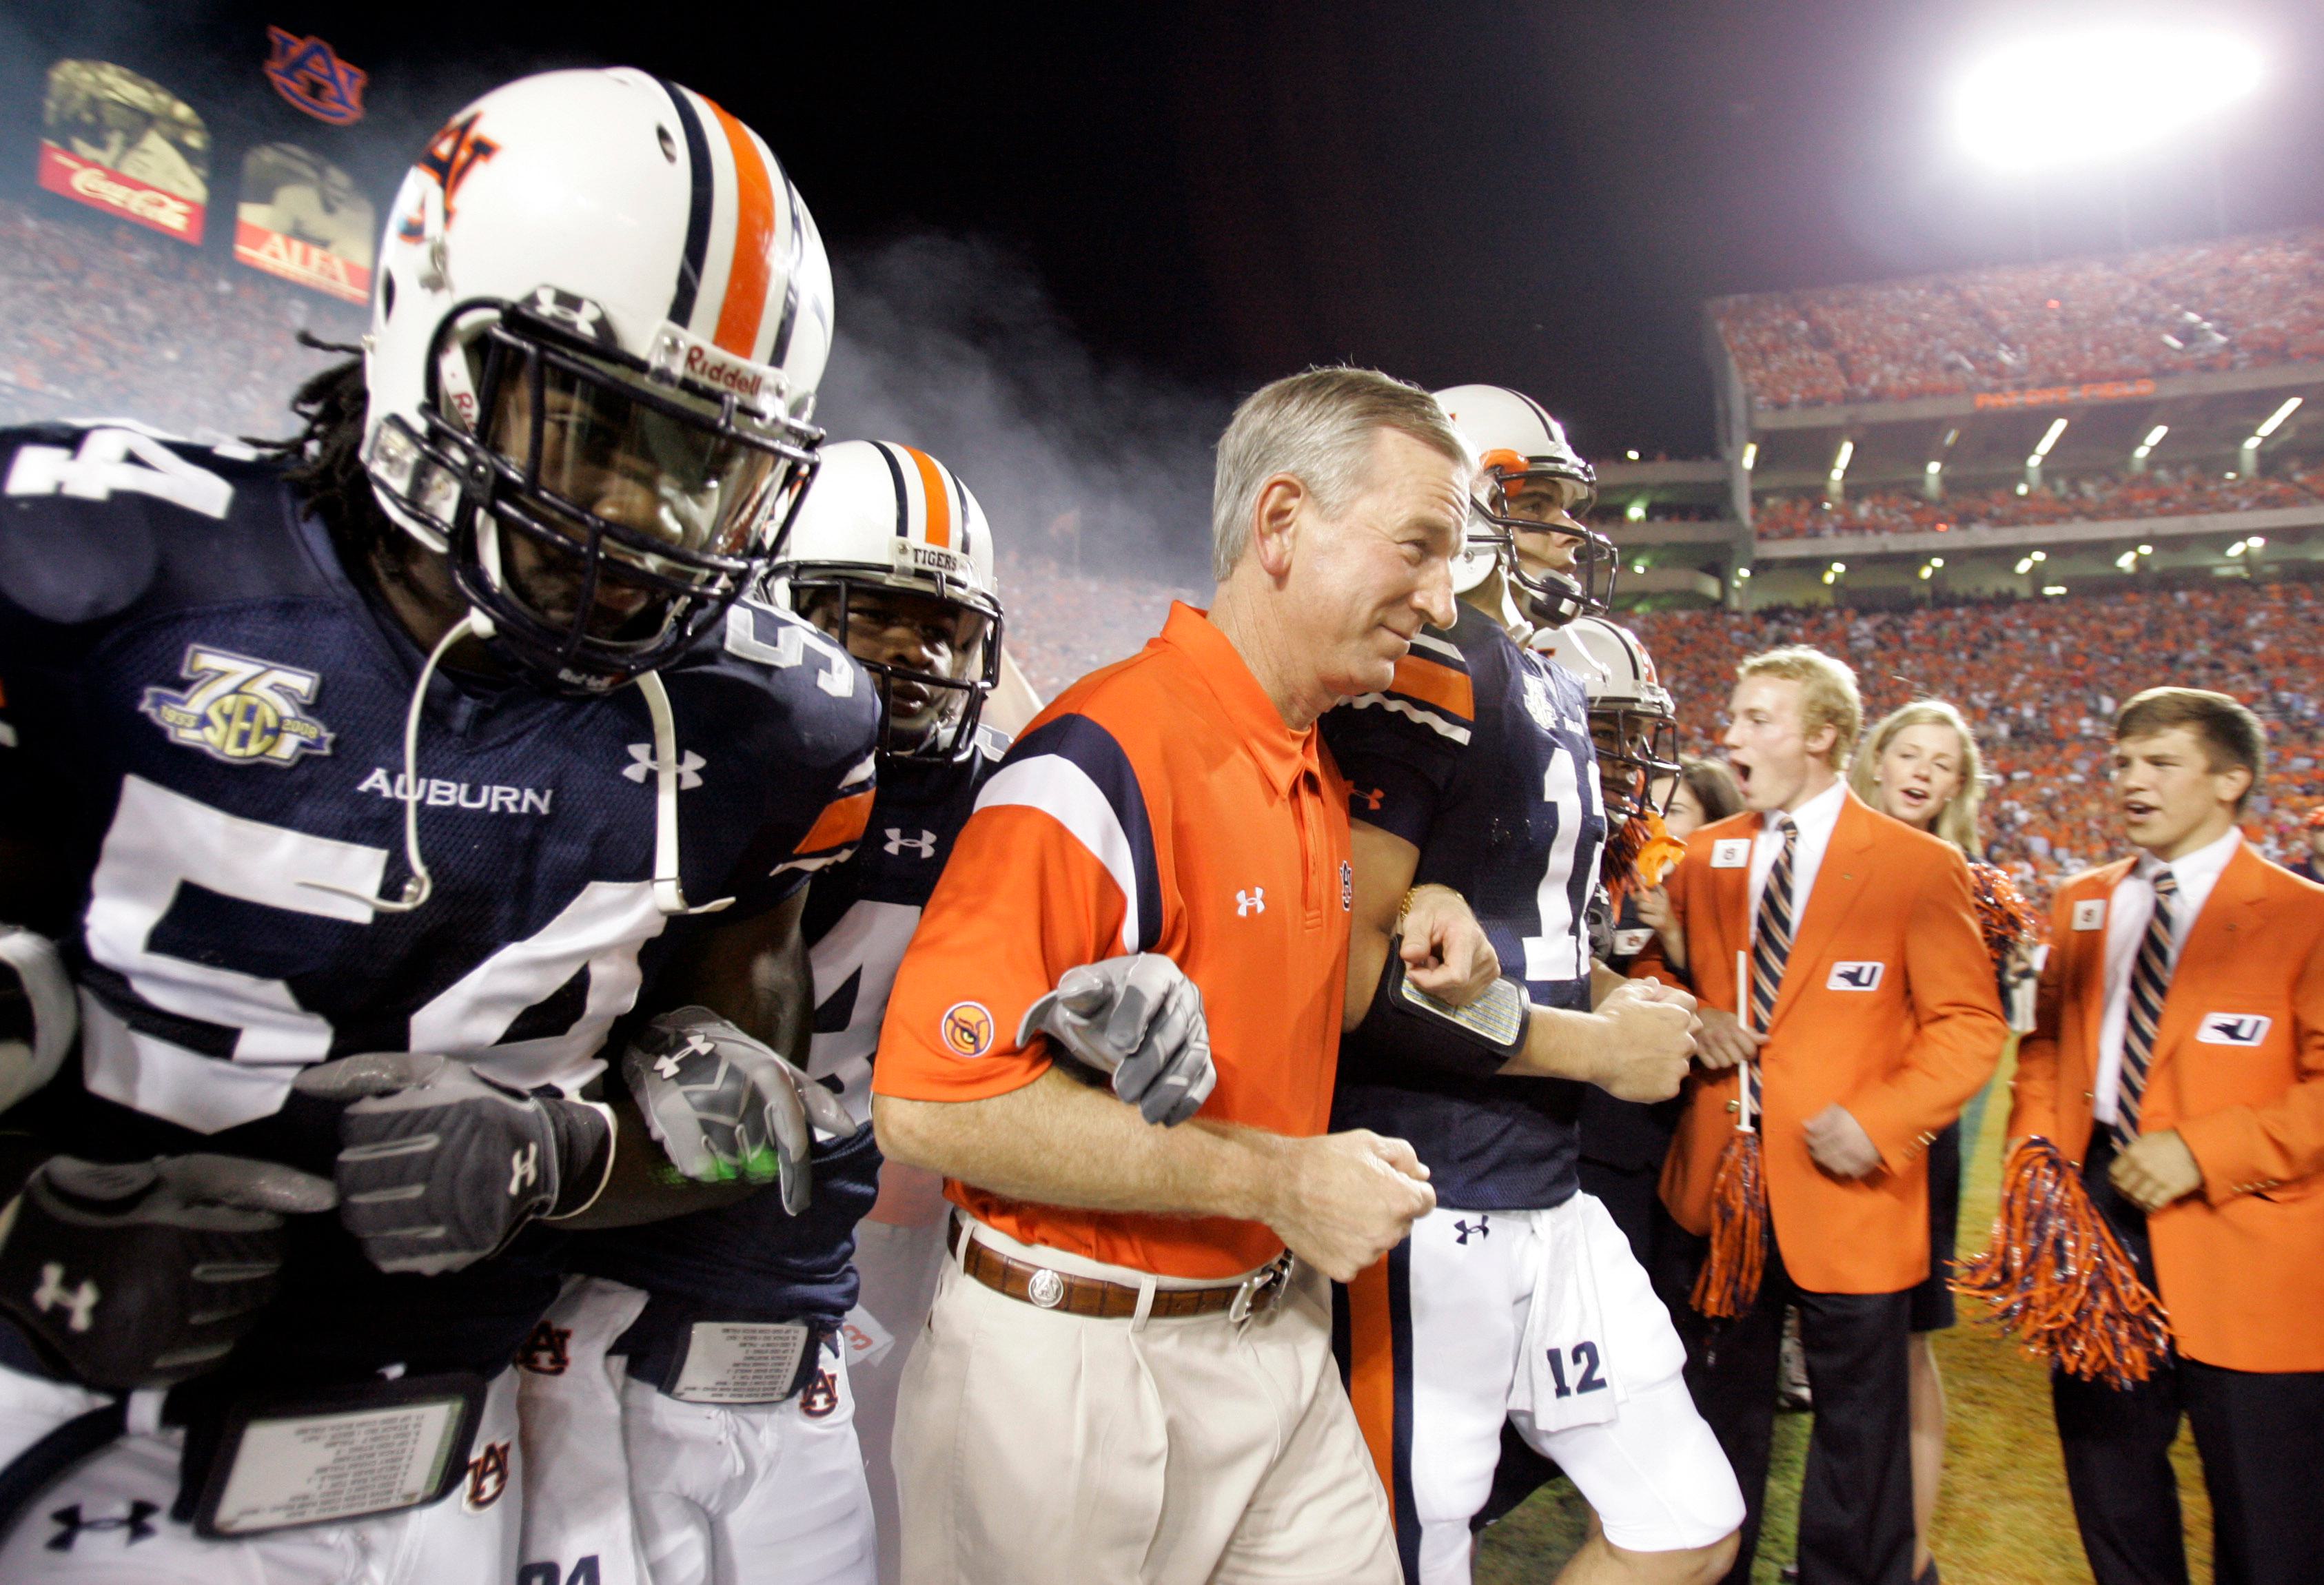 Auburn coach Tommy Tuberville, center, leads players Quentin Groves, left, and Brandon Cox, right, onto the field before the start of a football game against South Florida, Saturday Sept. 8, 2007, in Auburn, Ala.